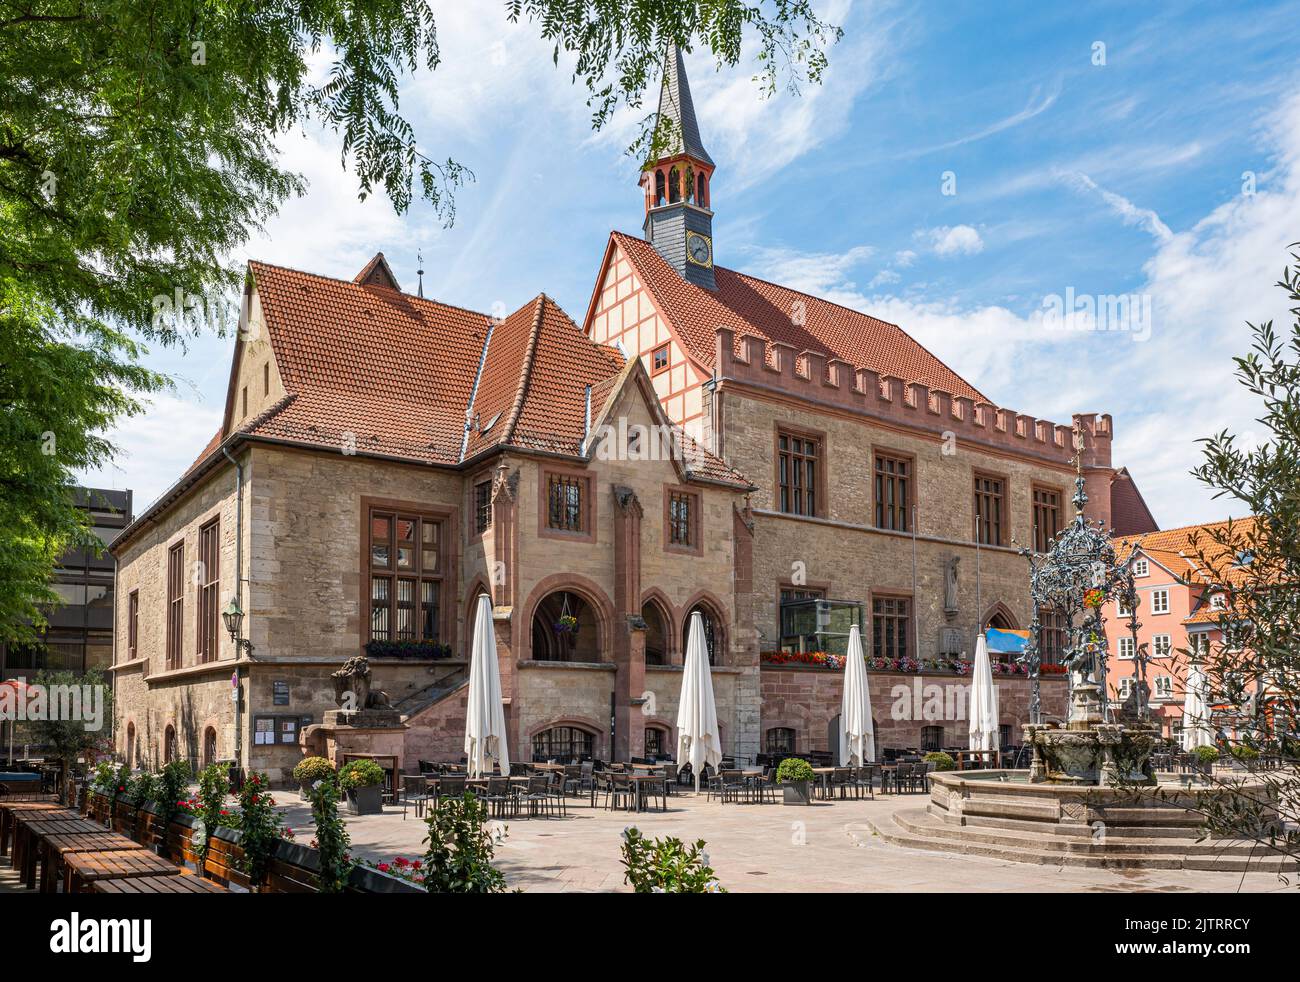 medieval town hall with Gaenseliesel fountain of the university town of Goettingen Stock Photo